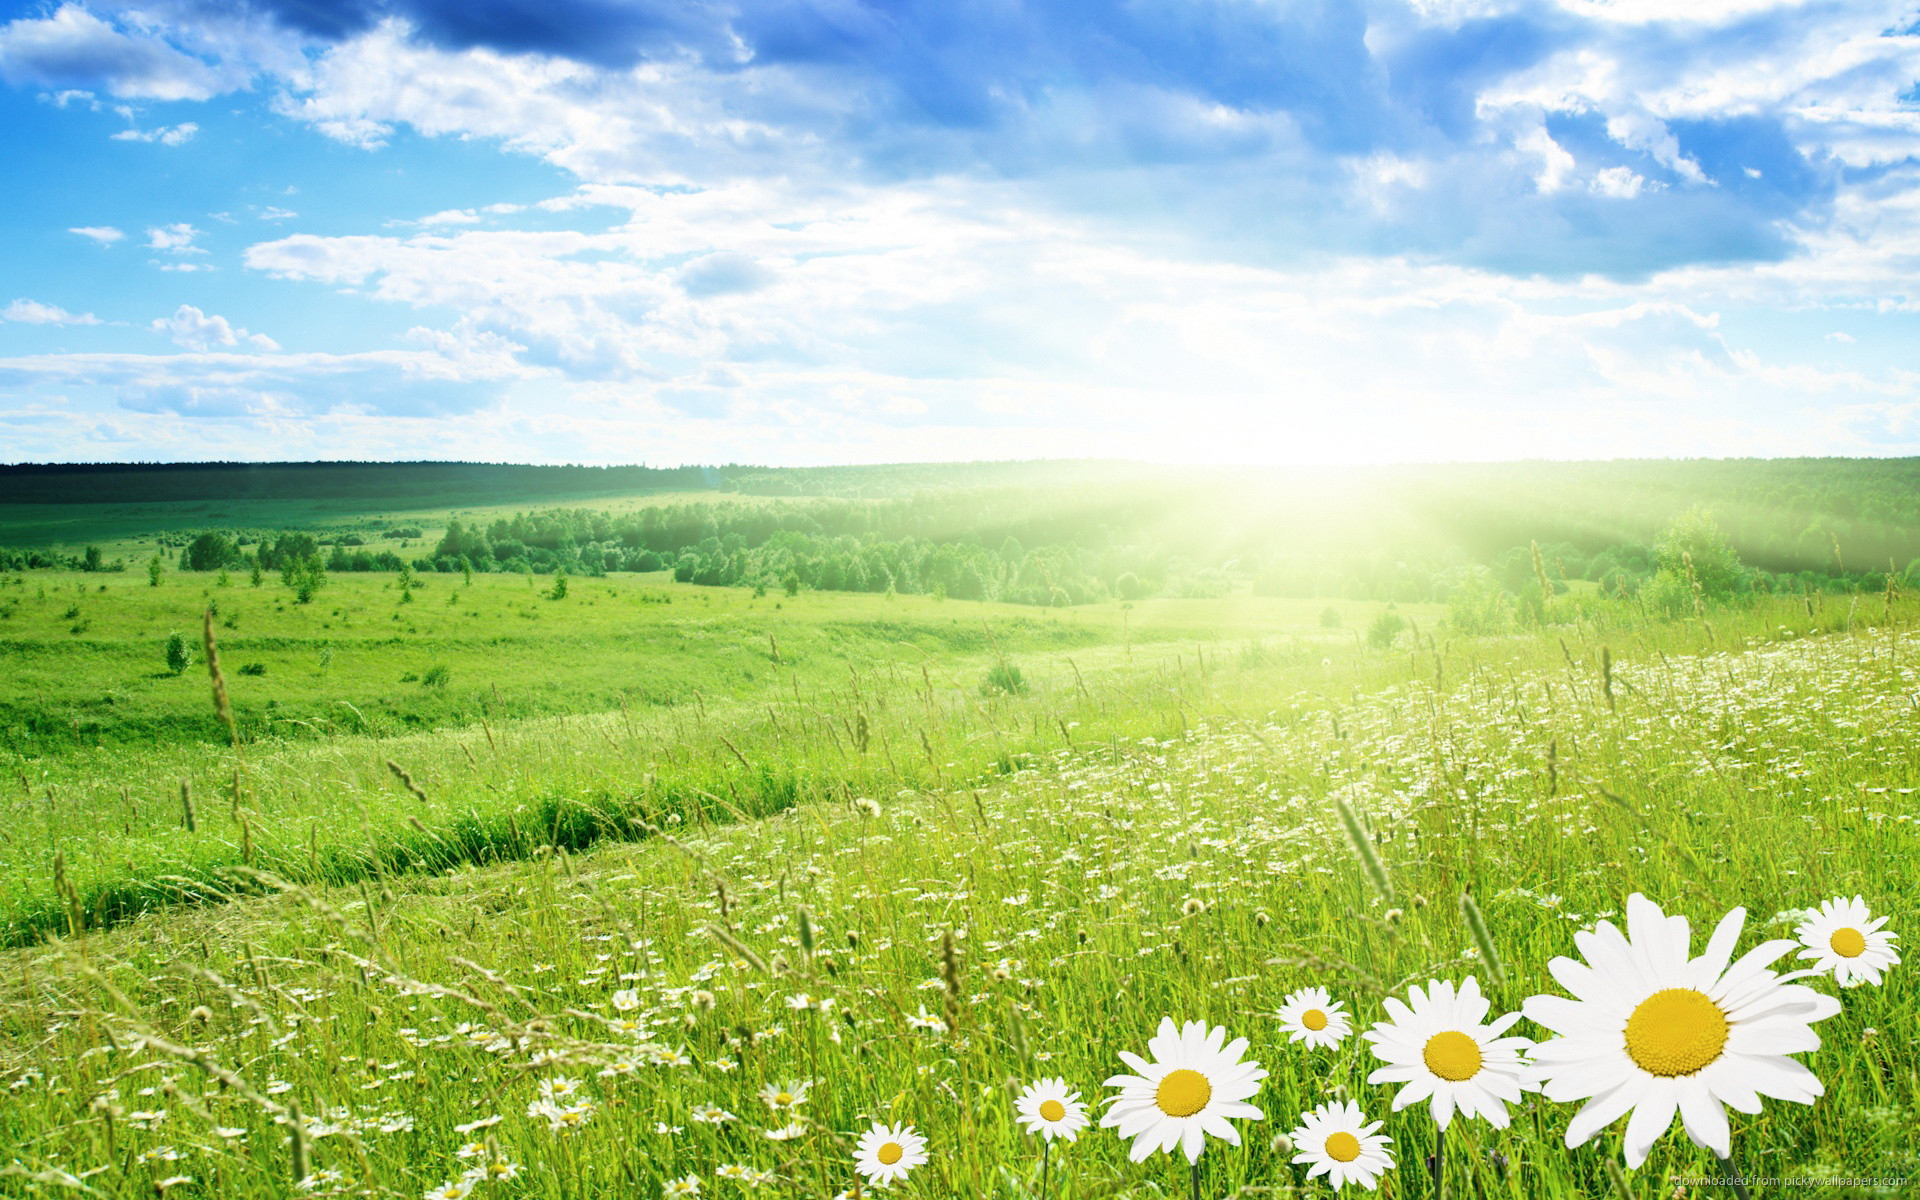 1920x1200 ... Sunrise Daisy Field - Flowers & Nature Background Wallpapers on .